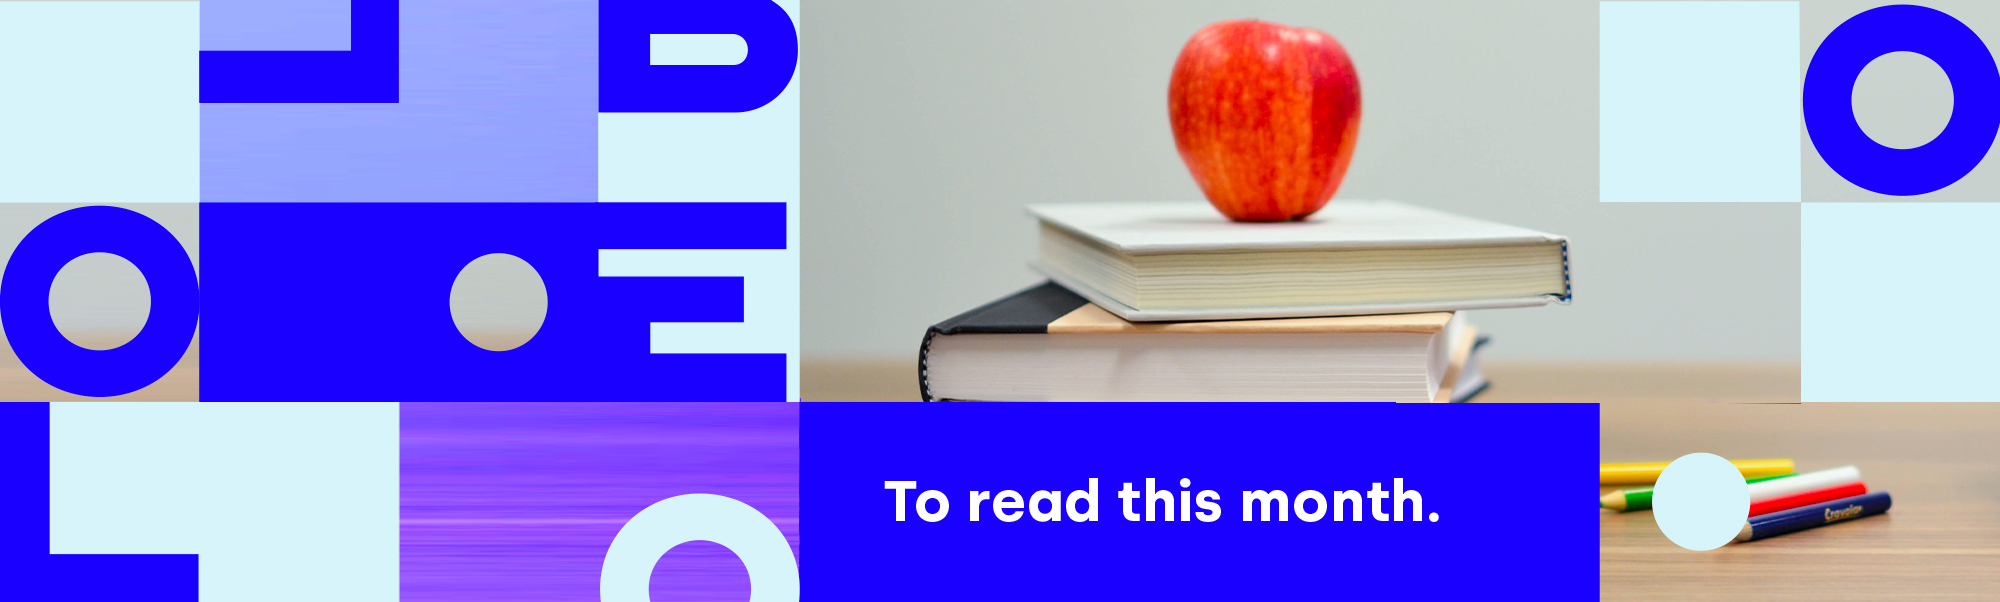 Banner with the name Libéo and the image of books and an apple to illustrate the September 2020 newsletter